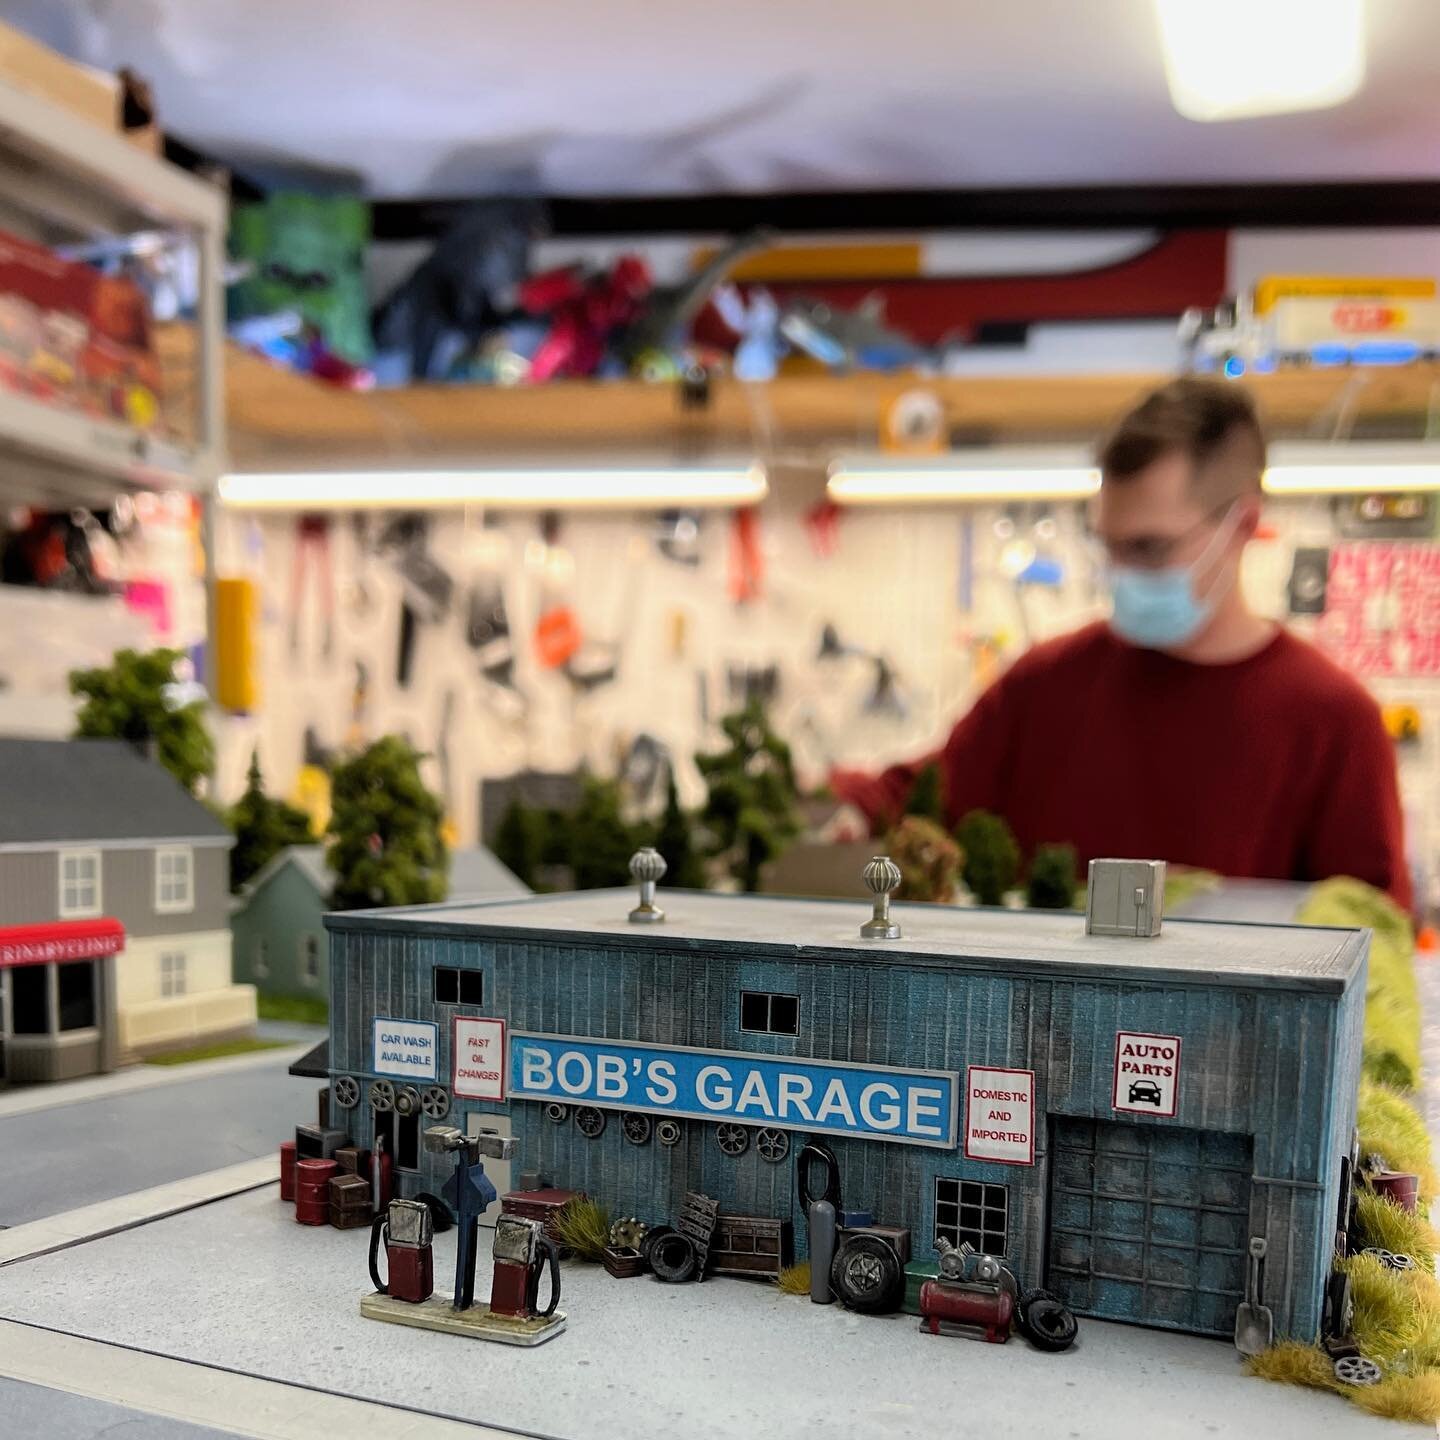 This weekend Kent and I finished up the Schitt&rsquo;s Creek diorama and then we photographed it. One major project remained though, all of the details for Bob&rsquo;s Garage. I spent most of my day prepping, painting and placing all of the fun littl